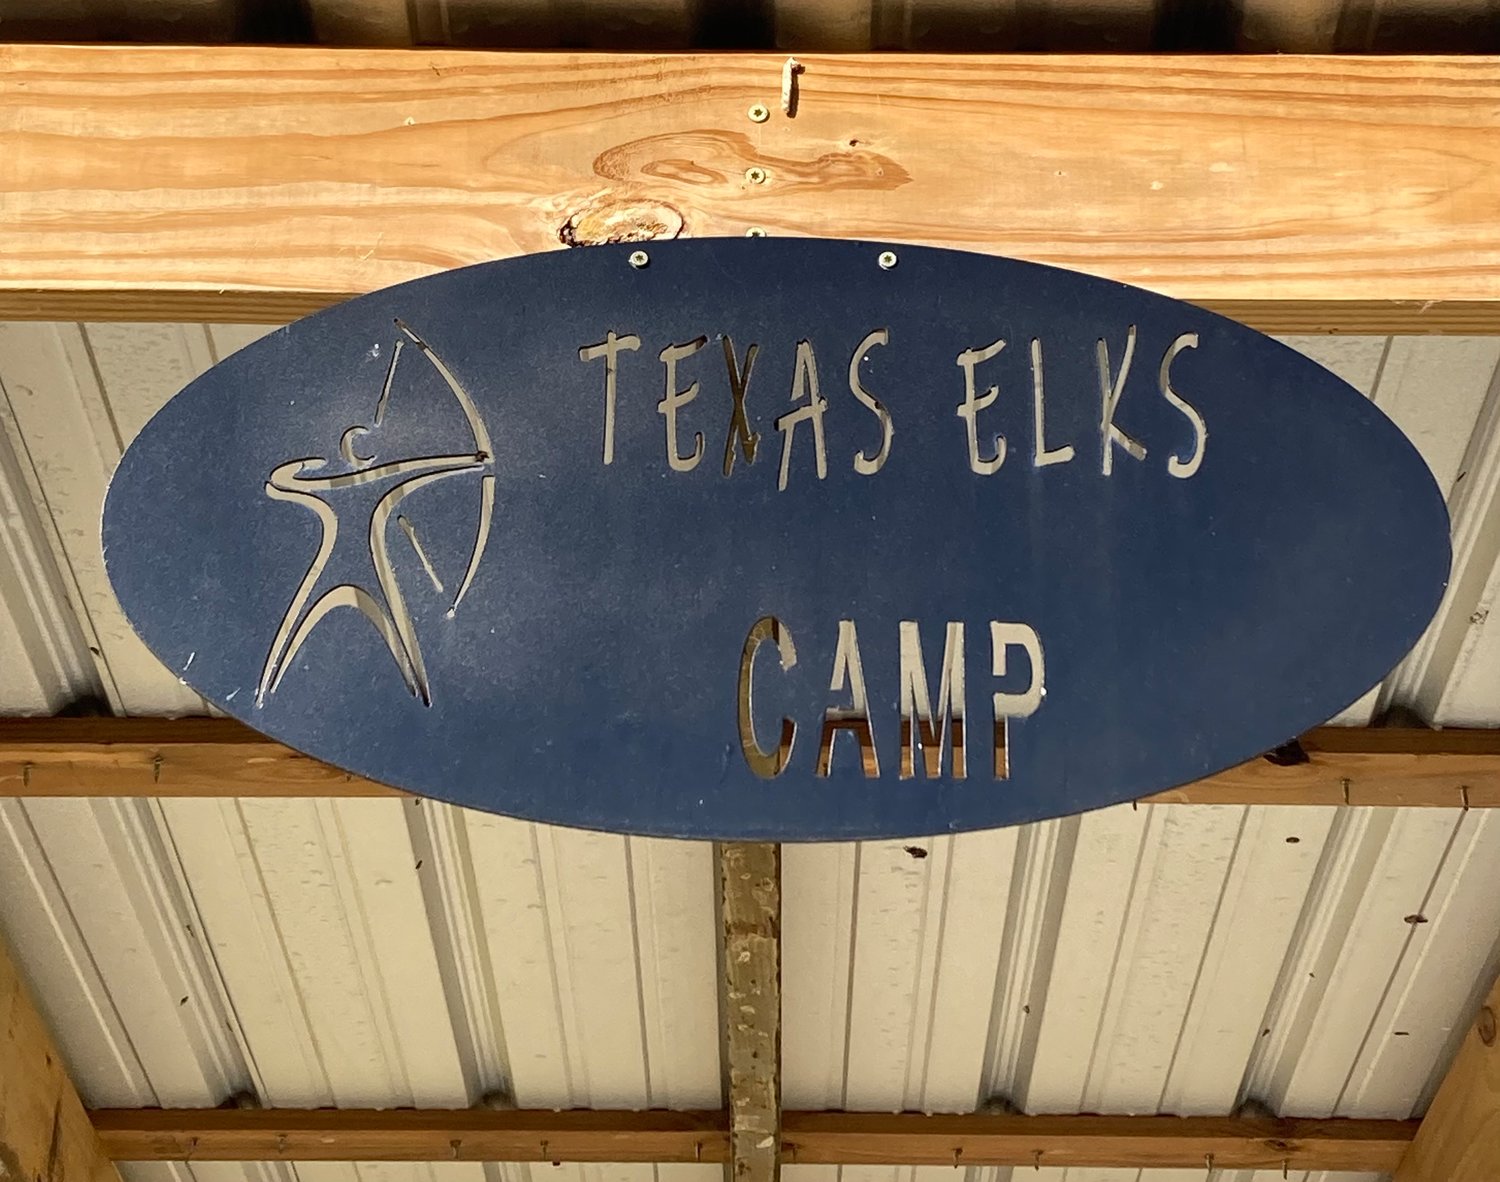 This camp sign is posted on the shelter near the field where campers practice archery.